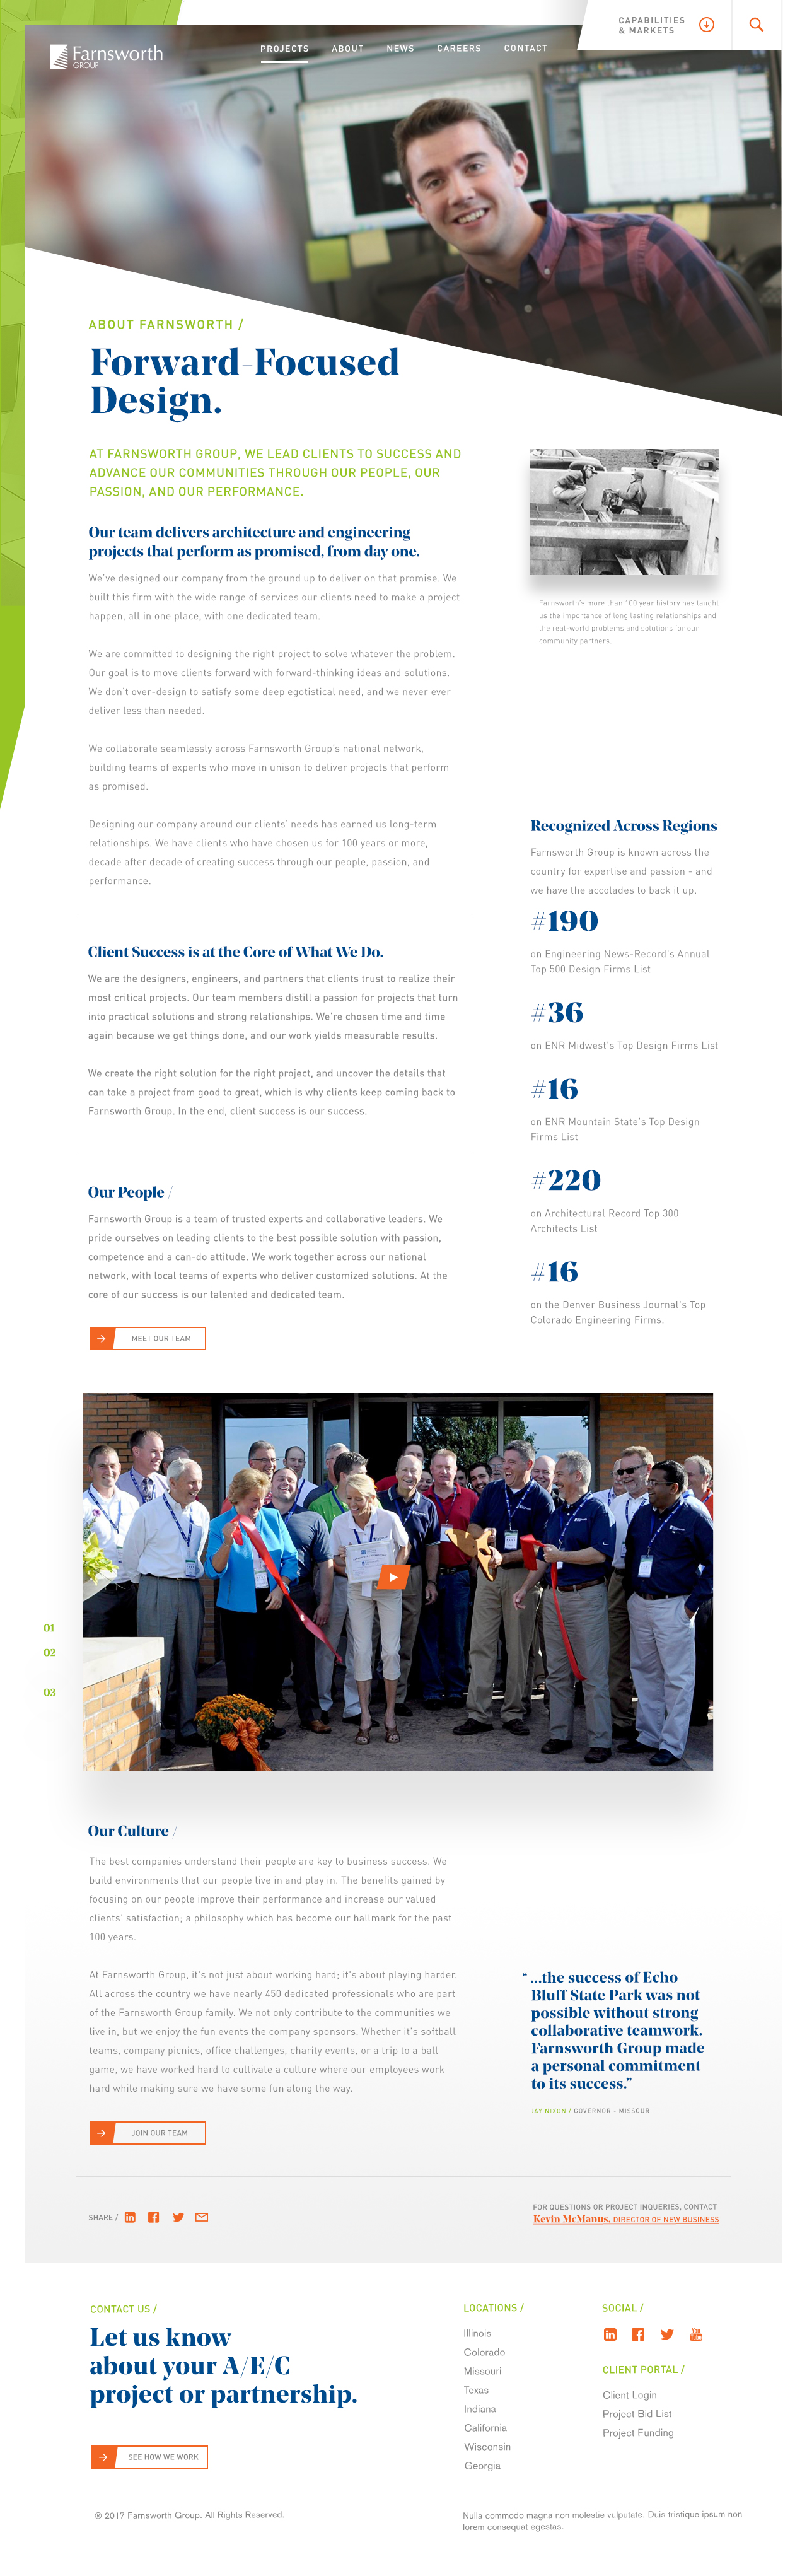 Farnsworth Group home page